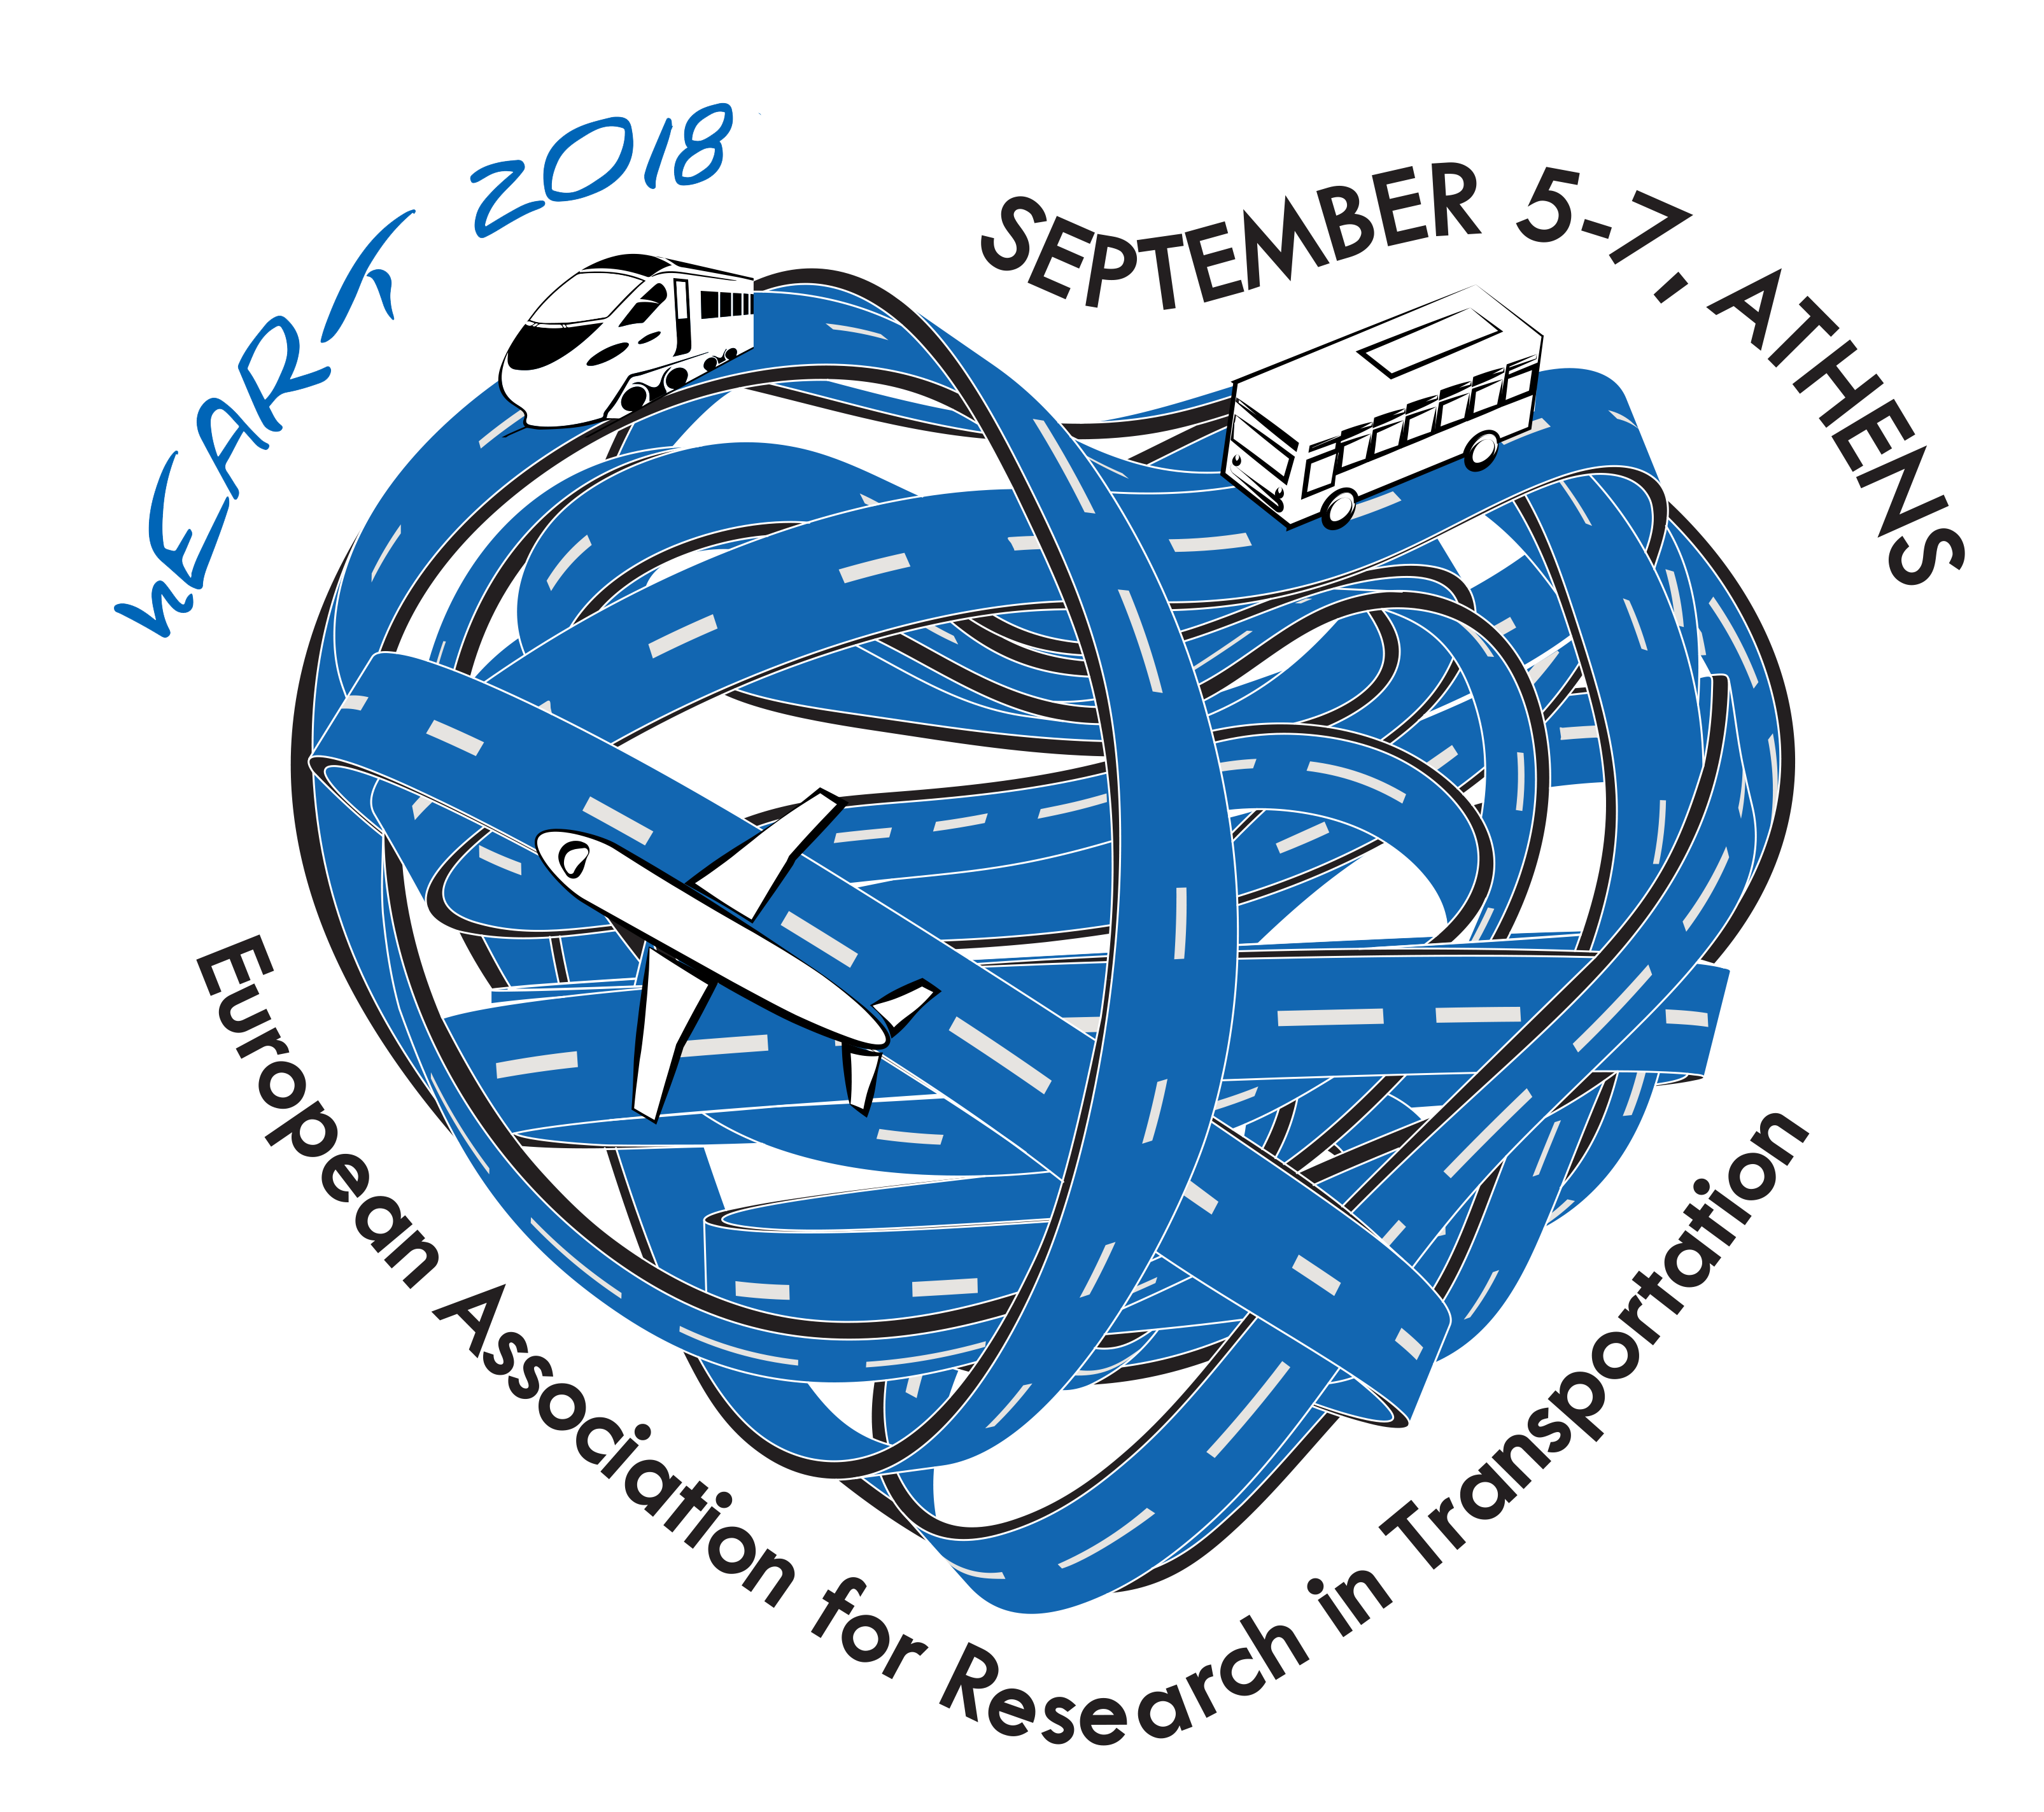 hEART 2018 – 7th Symposium of the European Association for Research in Transportation